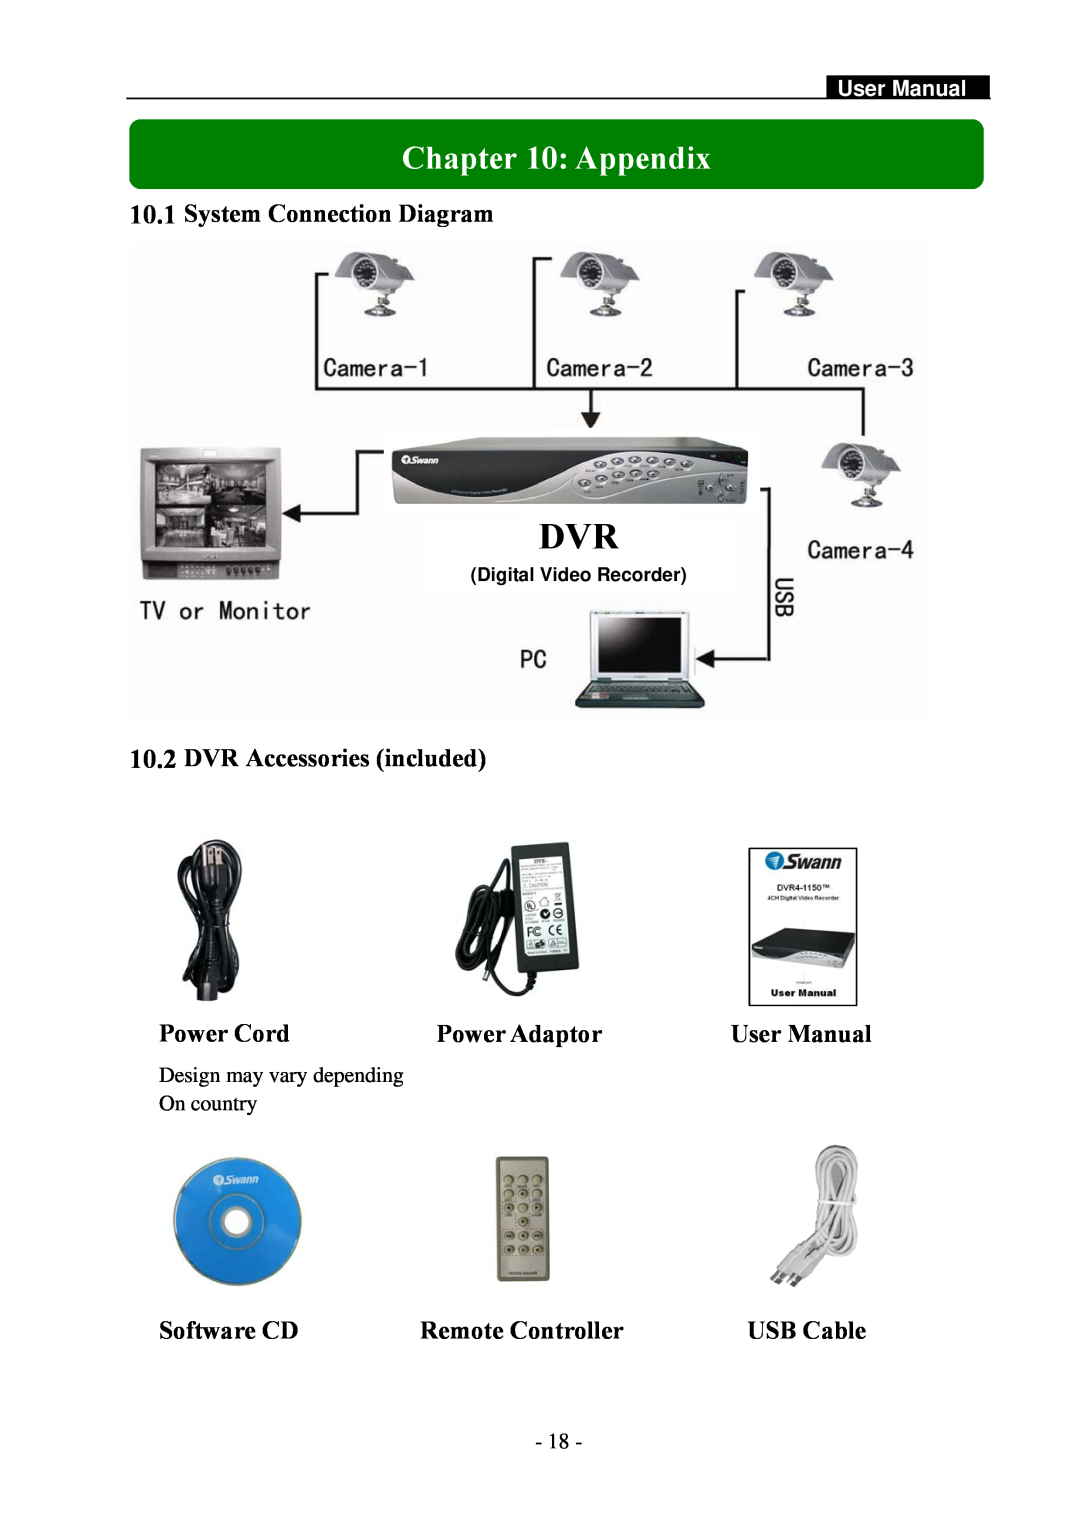 Swann SW242-2LP Appendix, System Connection Diagram, DVR Accessories included, Power Cord, Power Adaptor, Software CD 